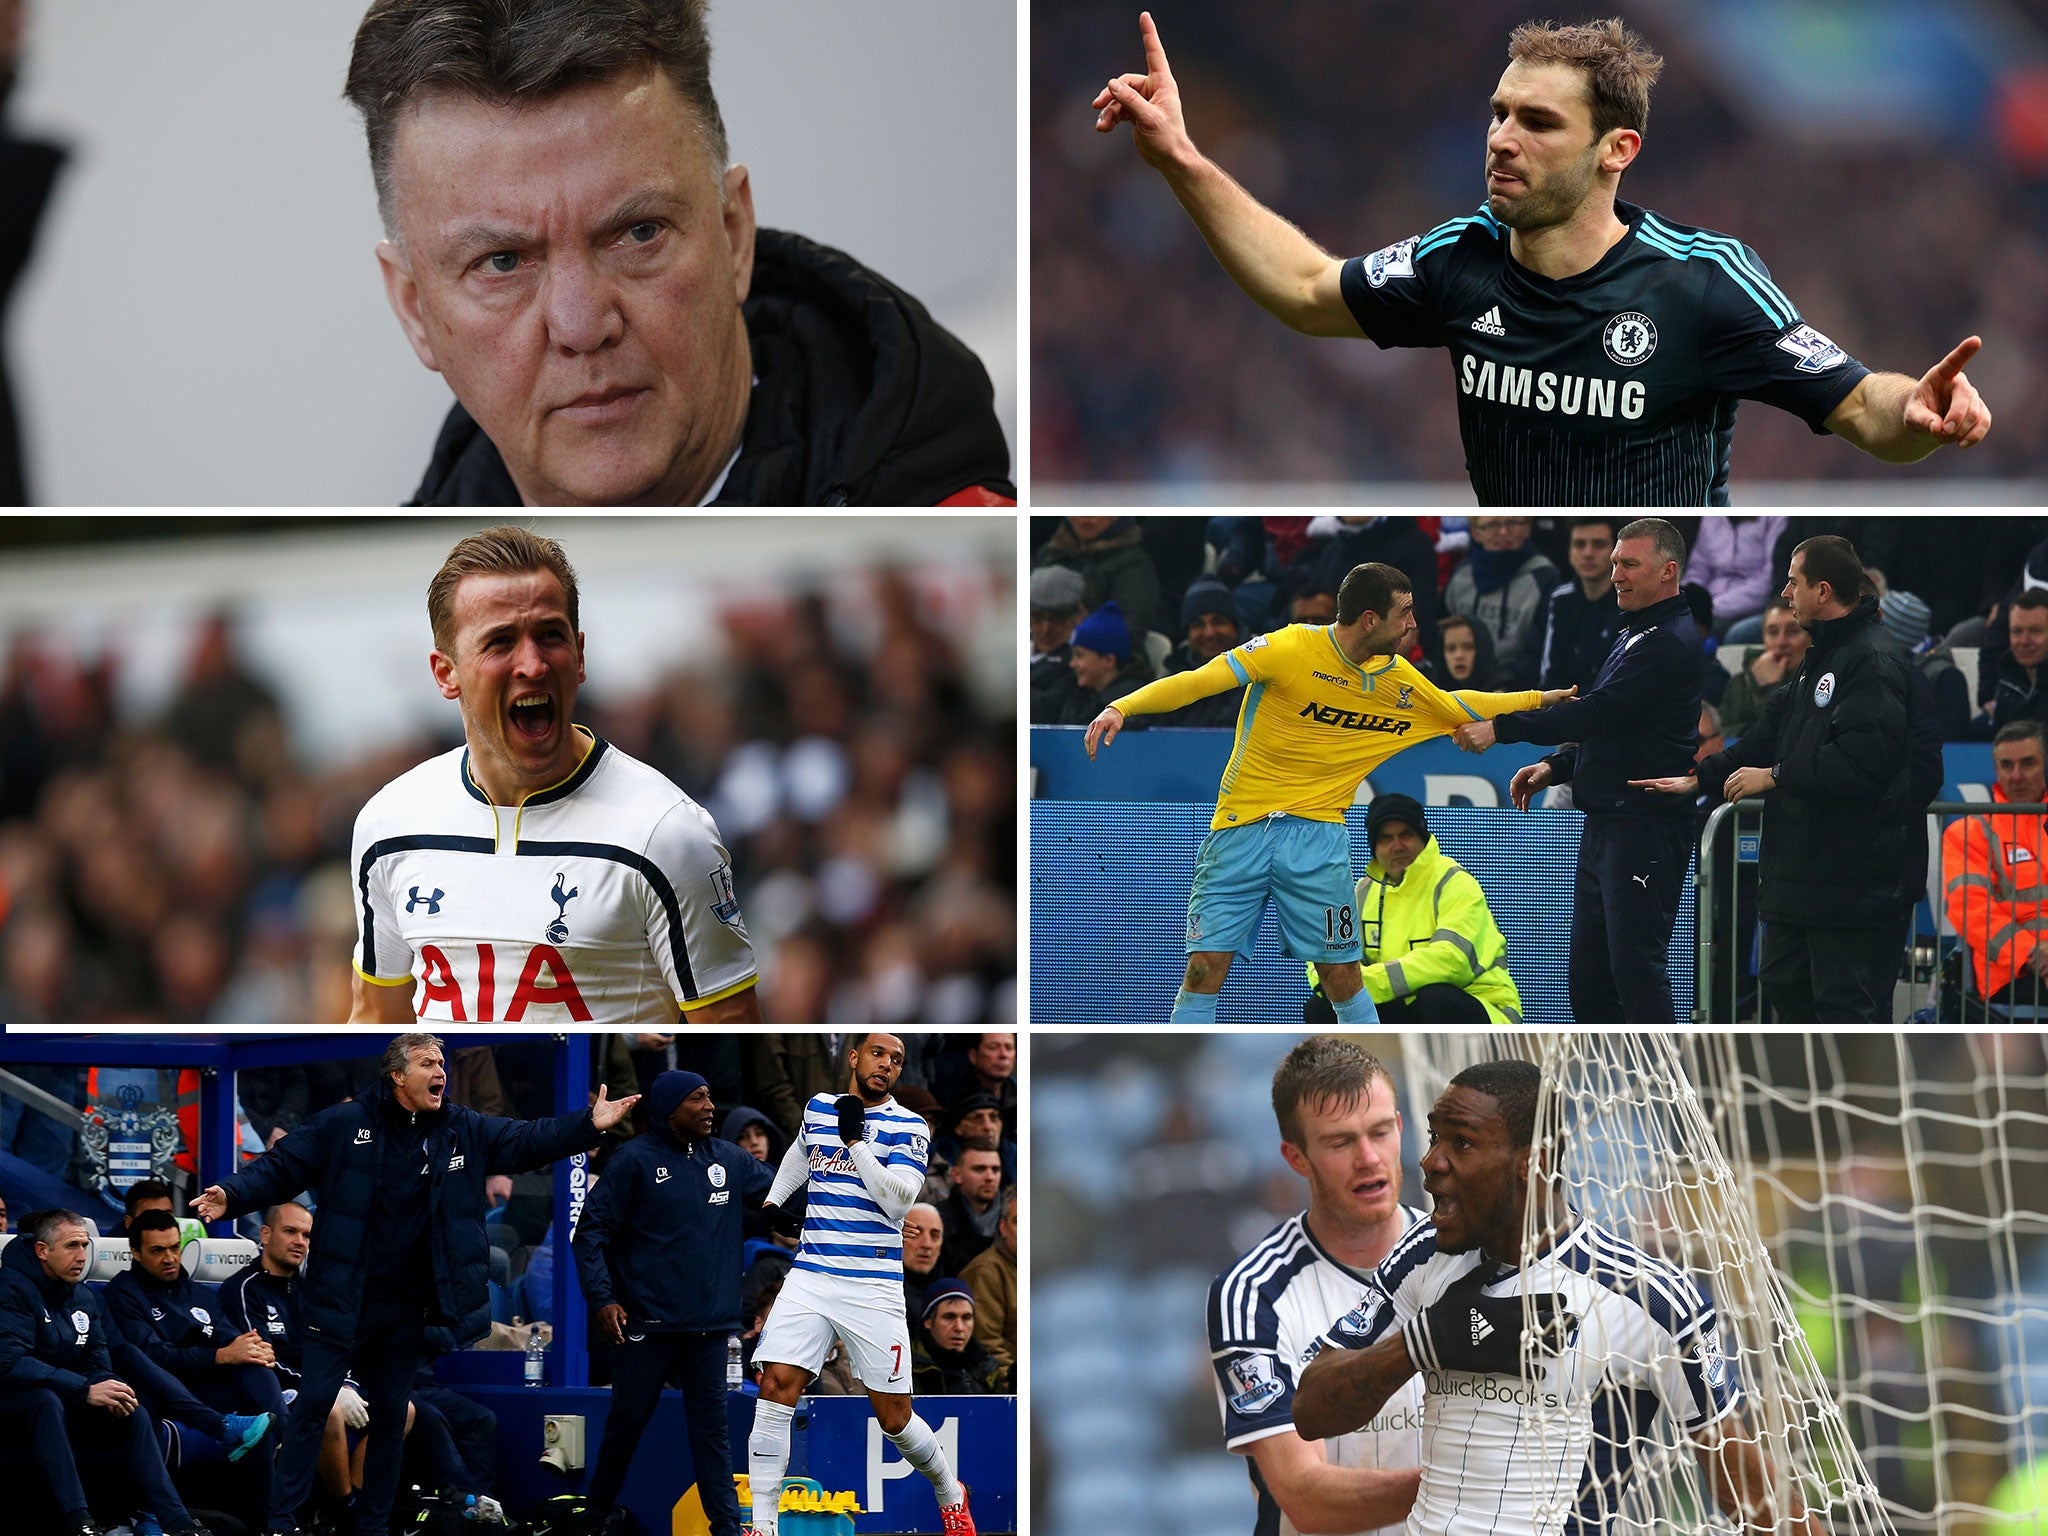 Six things we learnt from this weekend's Premier League